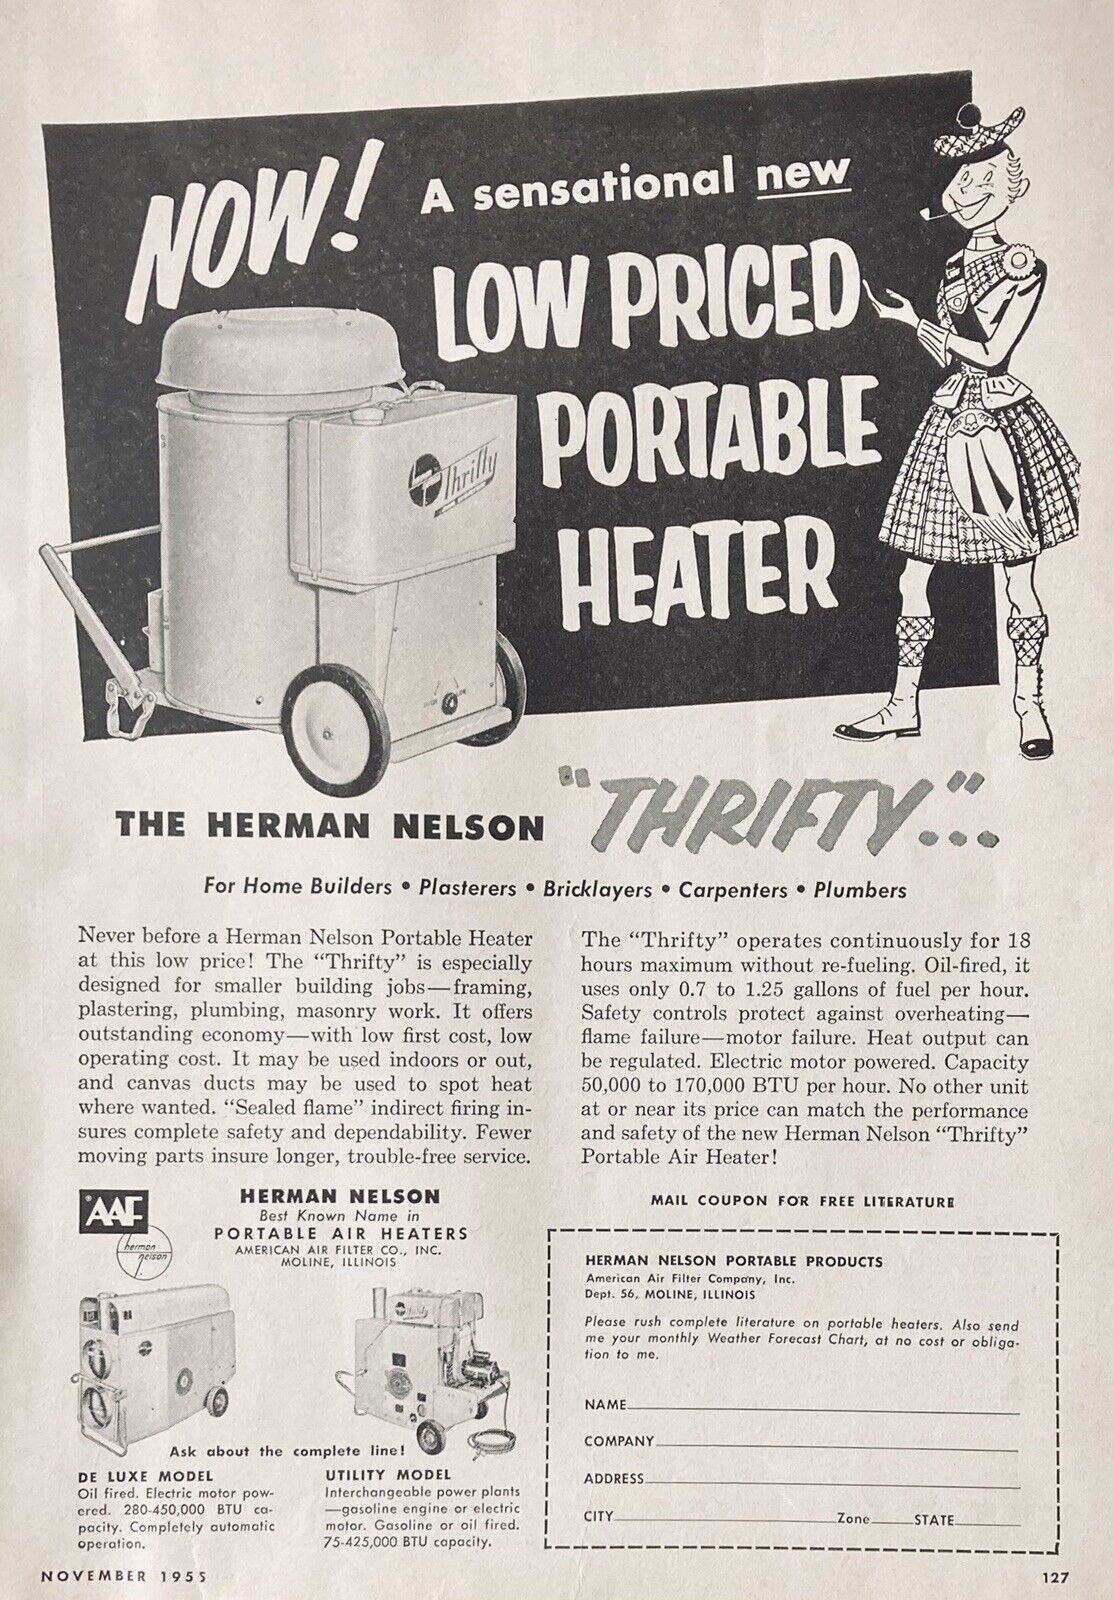 1955 AD(L25)~AMERICAN AIR FILTER CO. MOLINE, ILL. HERMAN NELSON PORTABLE HEATER